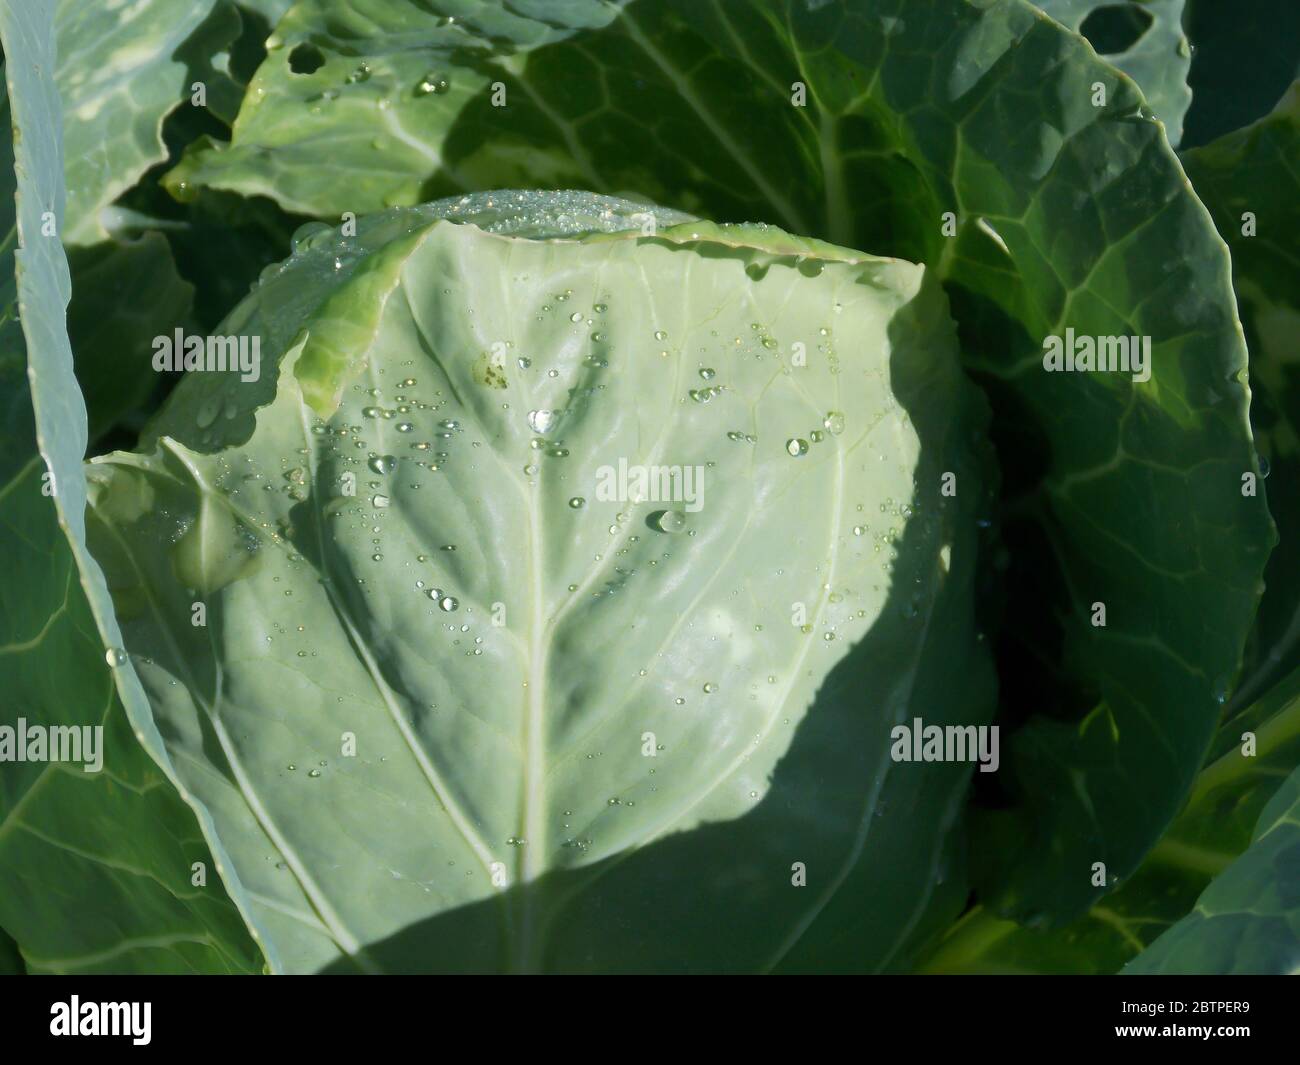 Fresh Healthy Green Cabbage Close-up Stock Photo